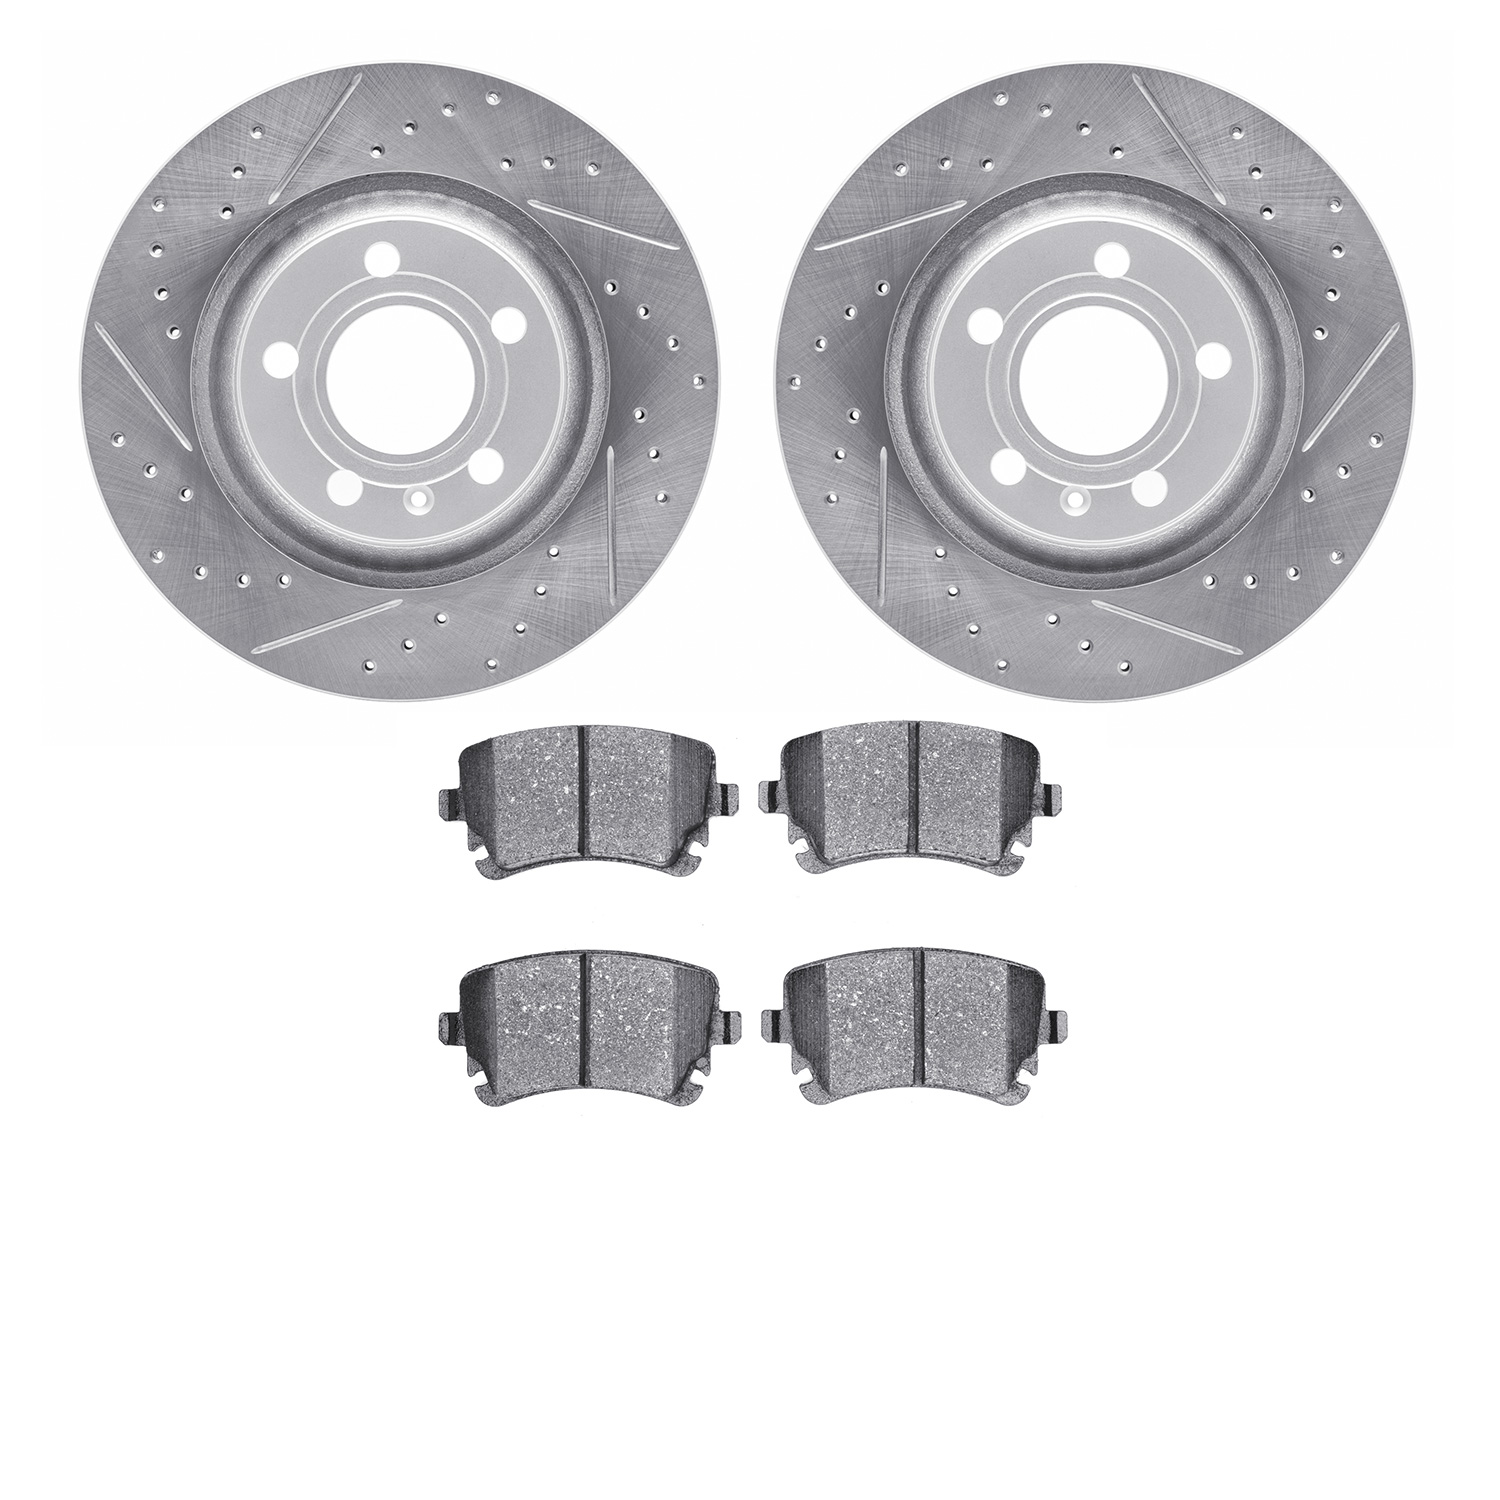 2502-73020 Geoperformance Drilled/Slotted Rotors w/5000 Advanced Brake Pads Kit, 2004-2009 Audi/Volkswagen, Position: Rear